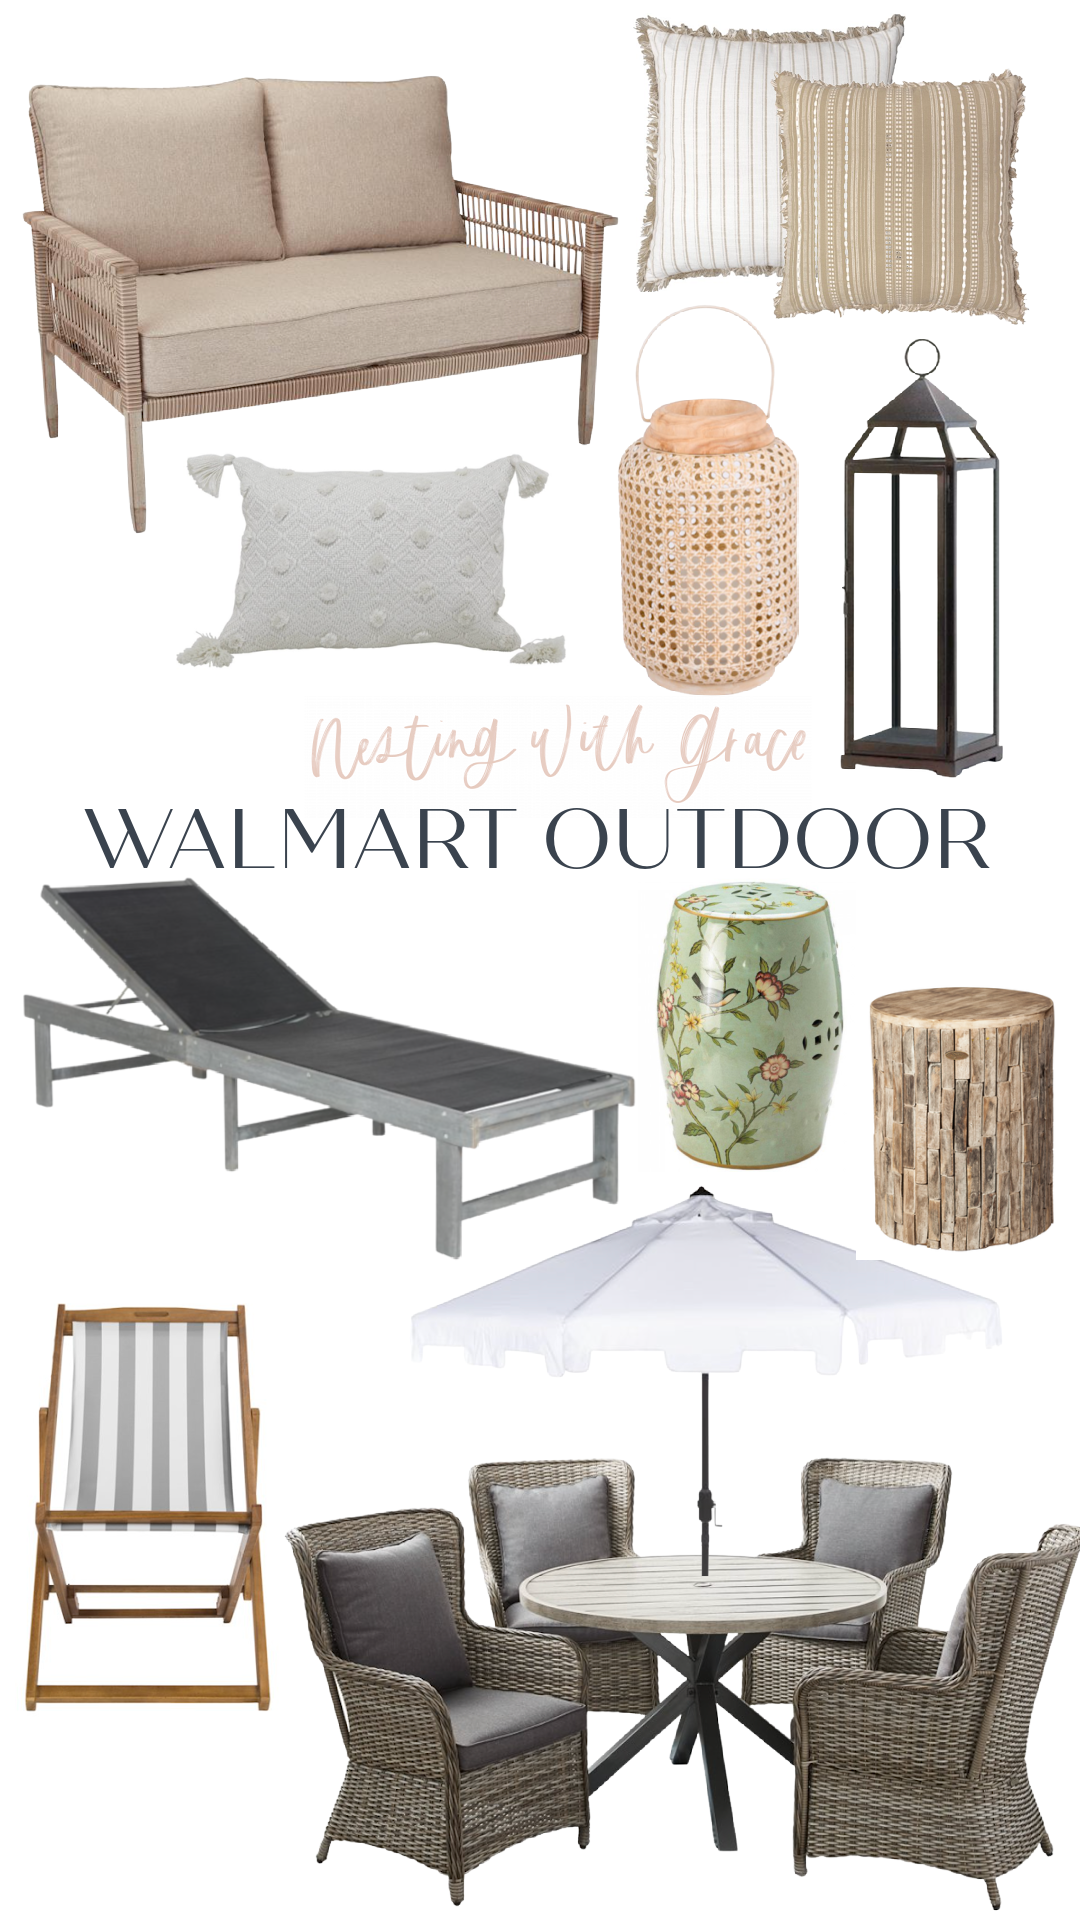 Outdoor Favorites from Target and Walmart